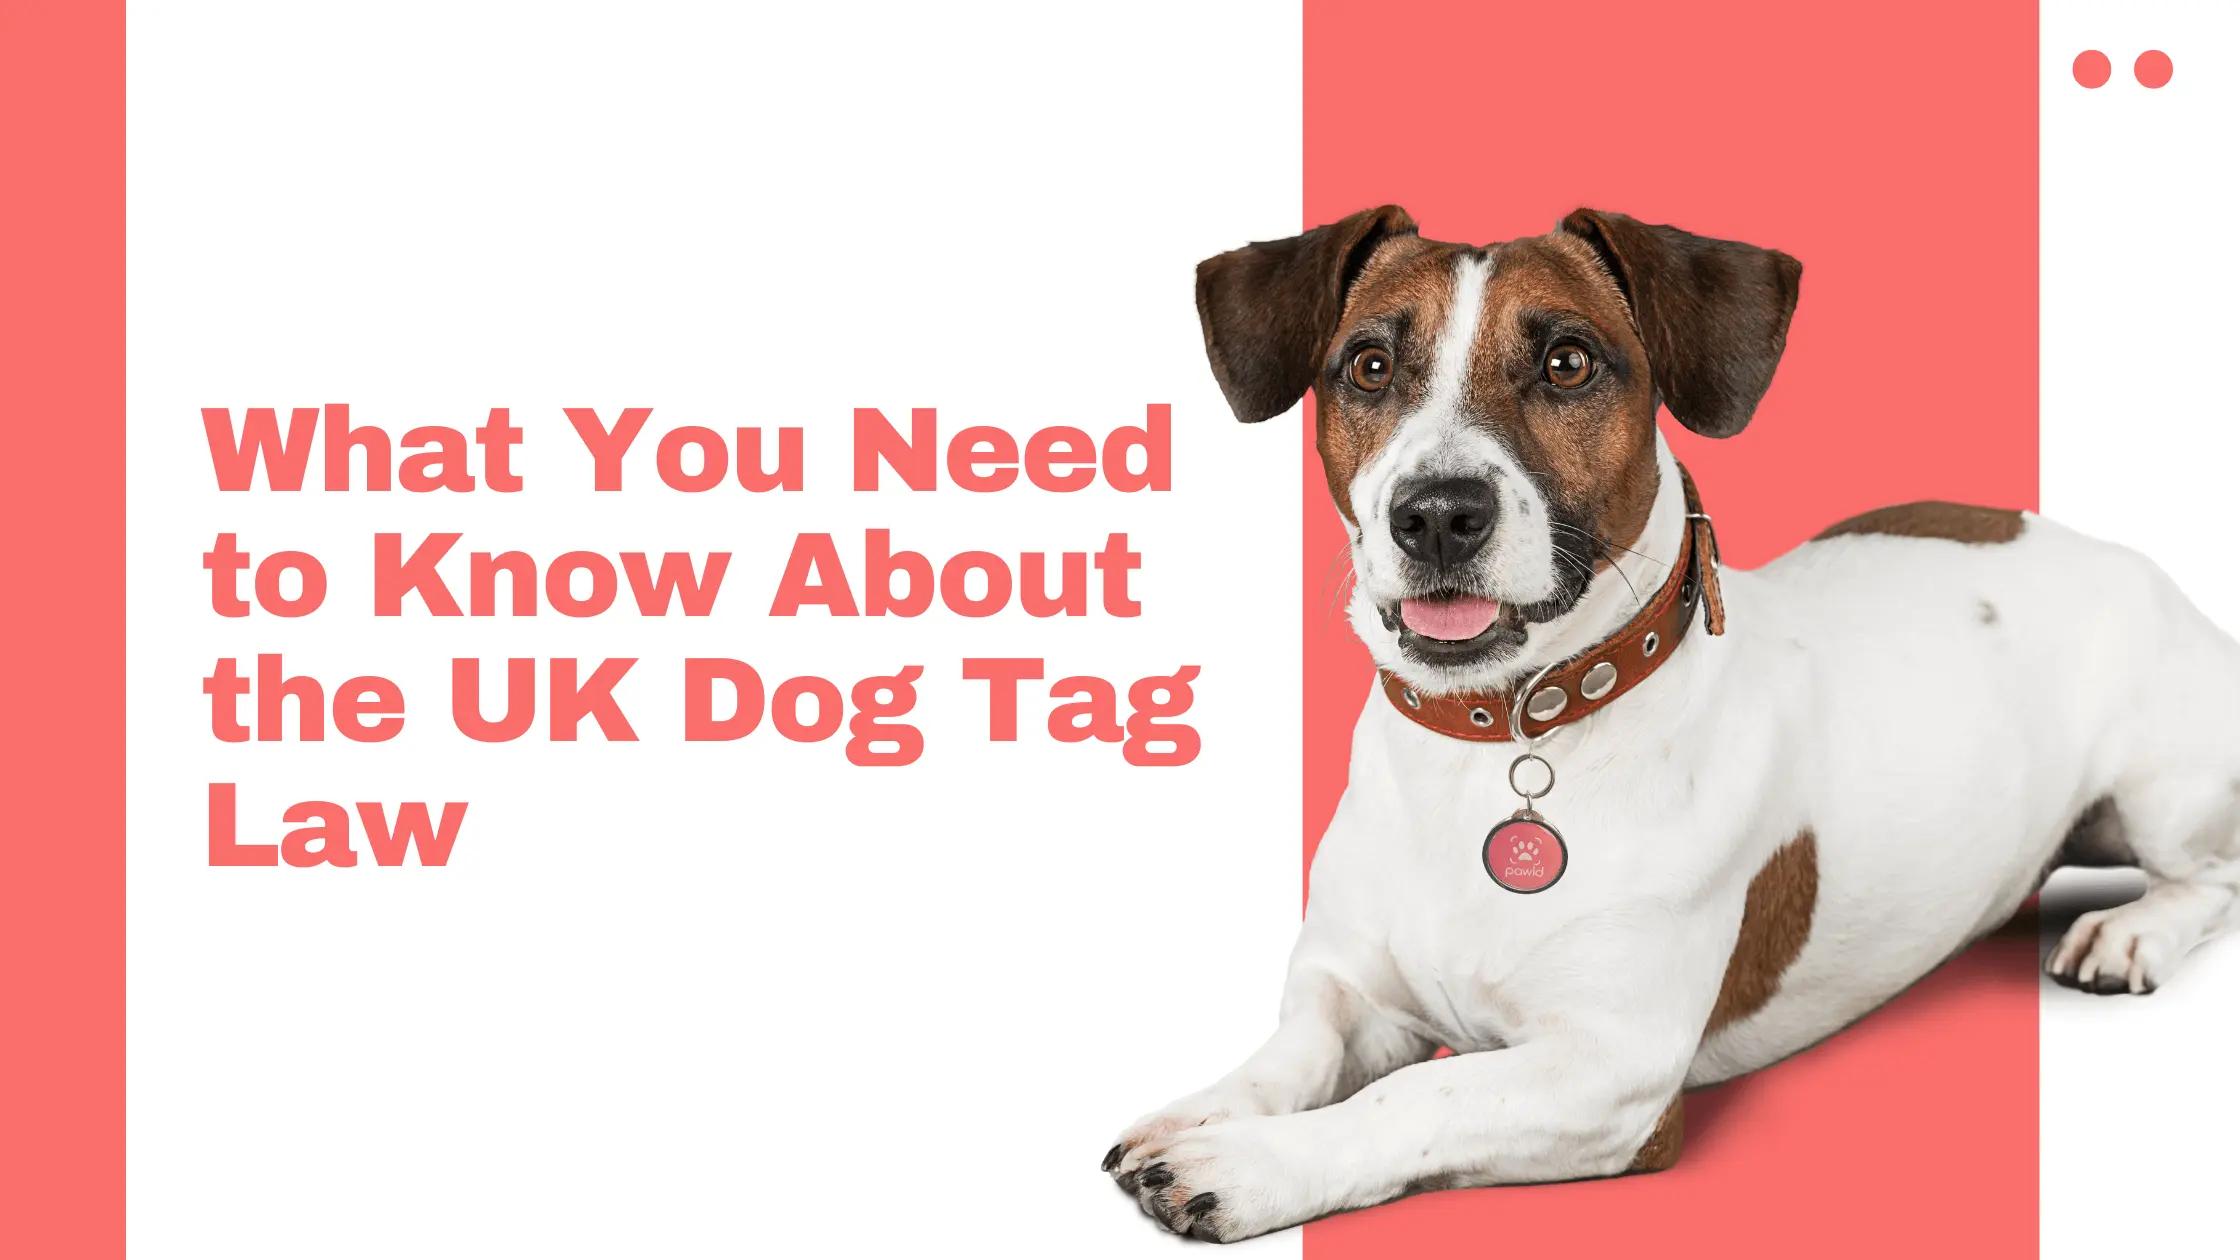 What You Need to Know About the UK Dog Tag Law